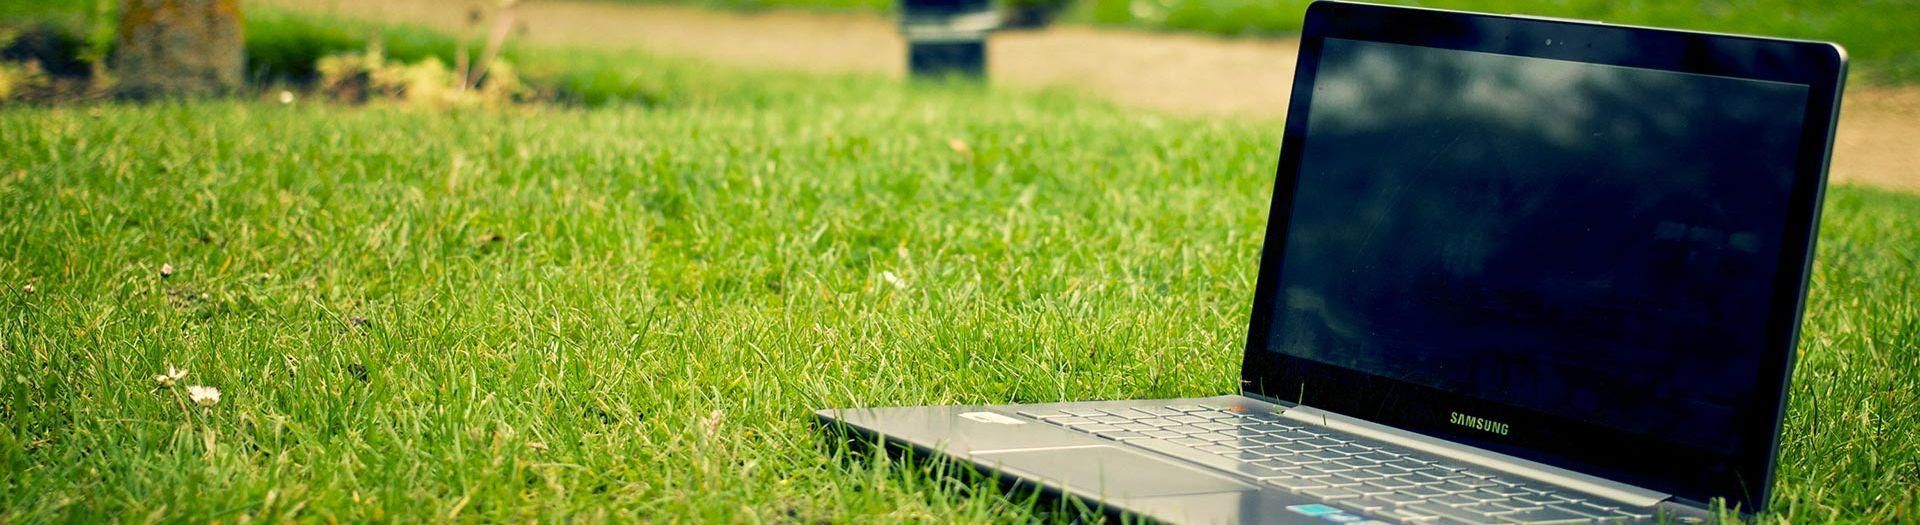 laptop-notebook-grass-meadow-1c6fa79c PC Software